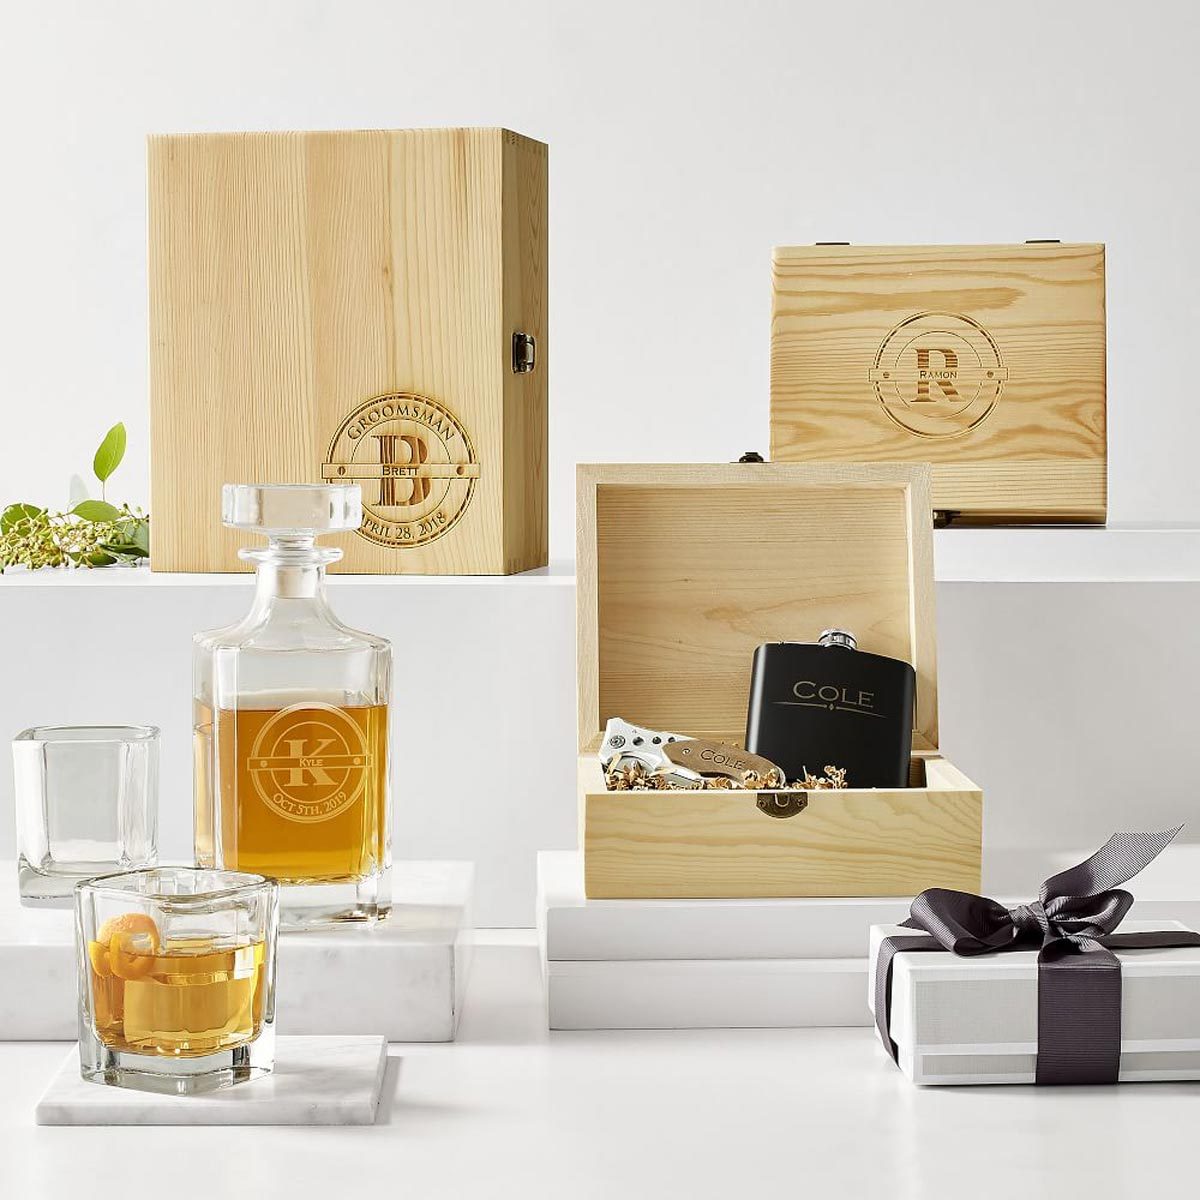 Personalized Decanter Set